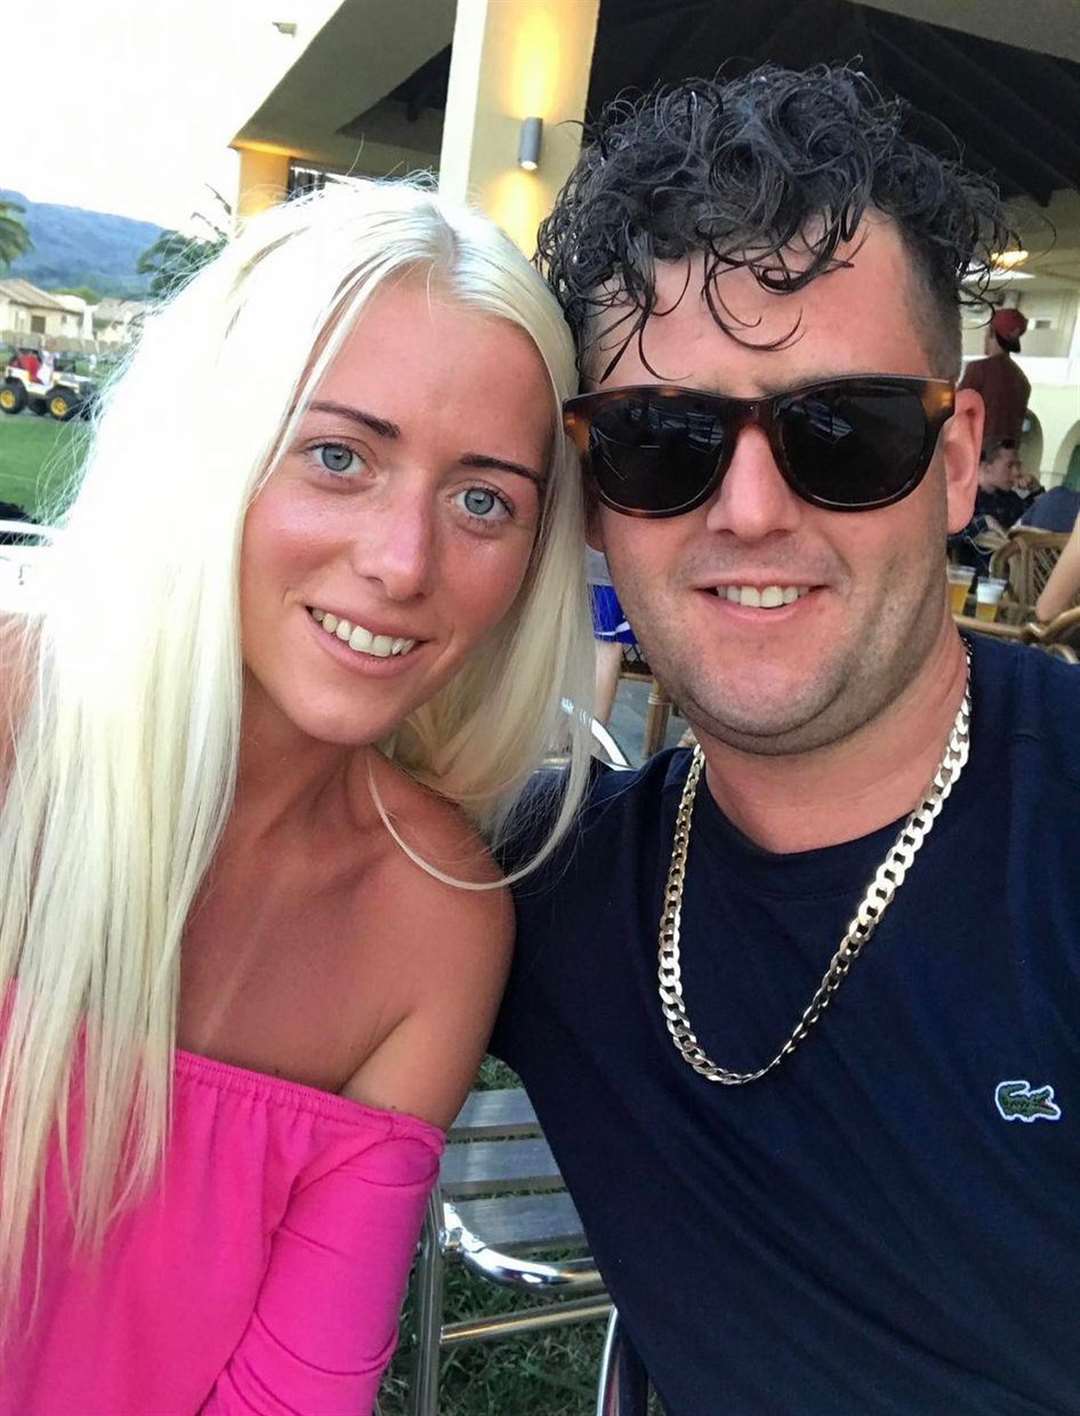 Laura and Craig met at a rave when she was just 16